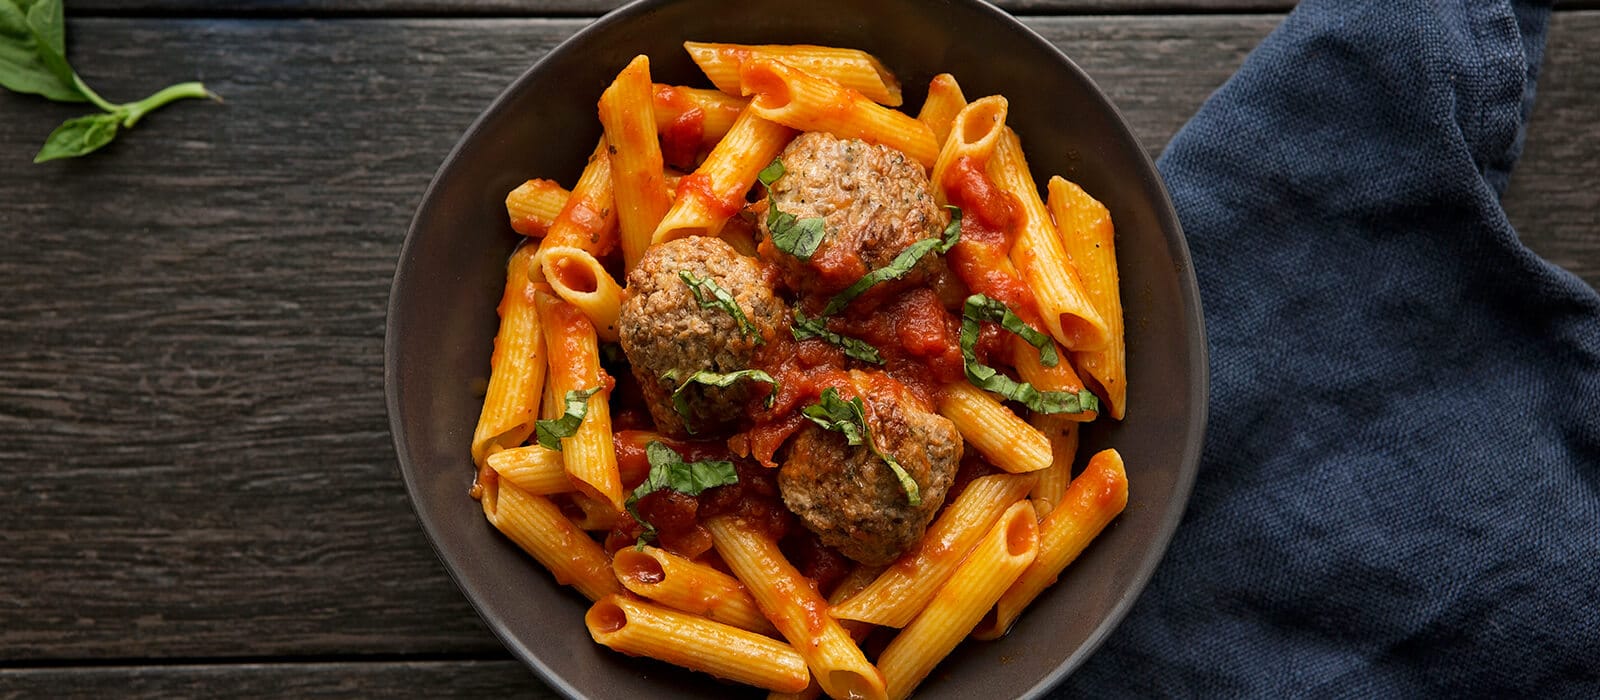 Penne Pasta Al Pomodoro with Grass-Fed Bison Meatballs - Metabolic ...